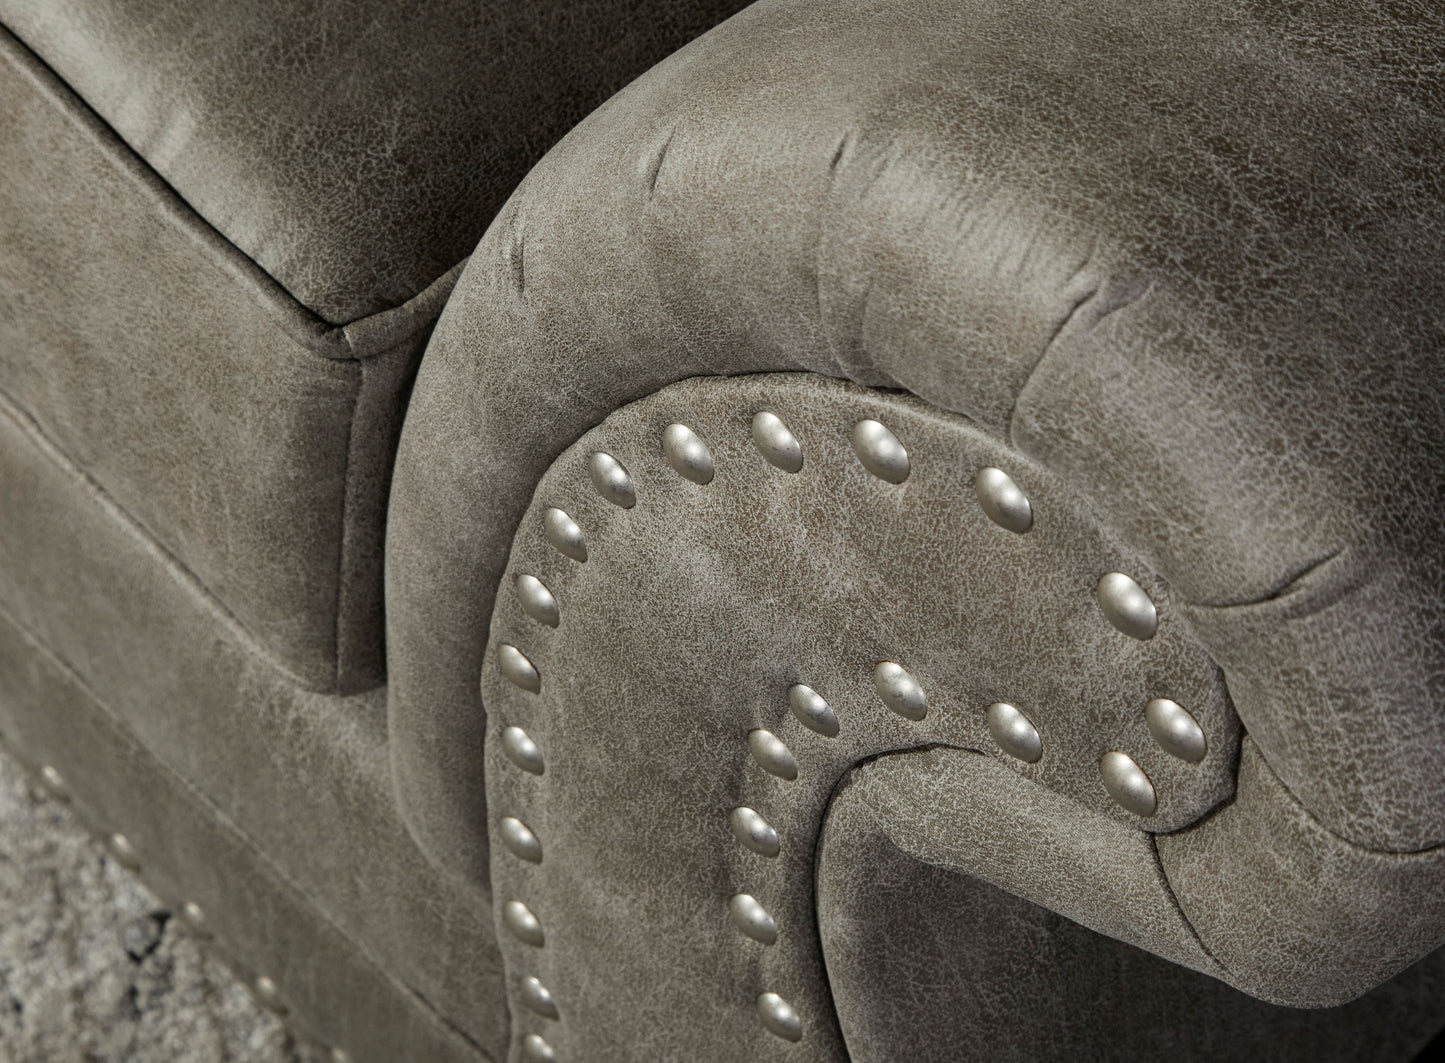 Leinster Faux Leather Upholstered Nailhead Loveseat in Stone Gray